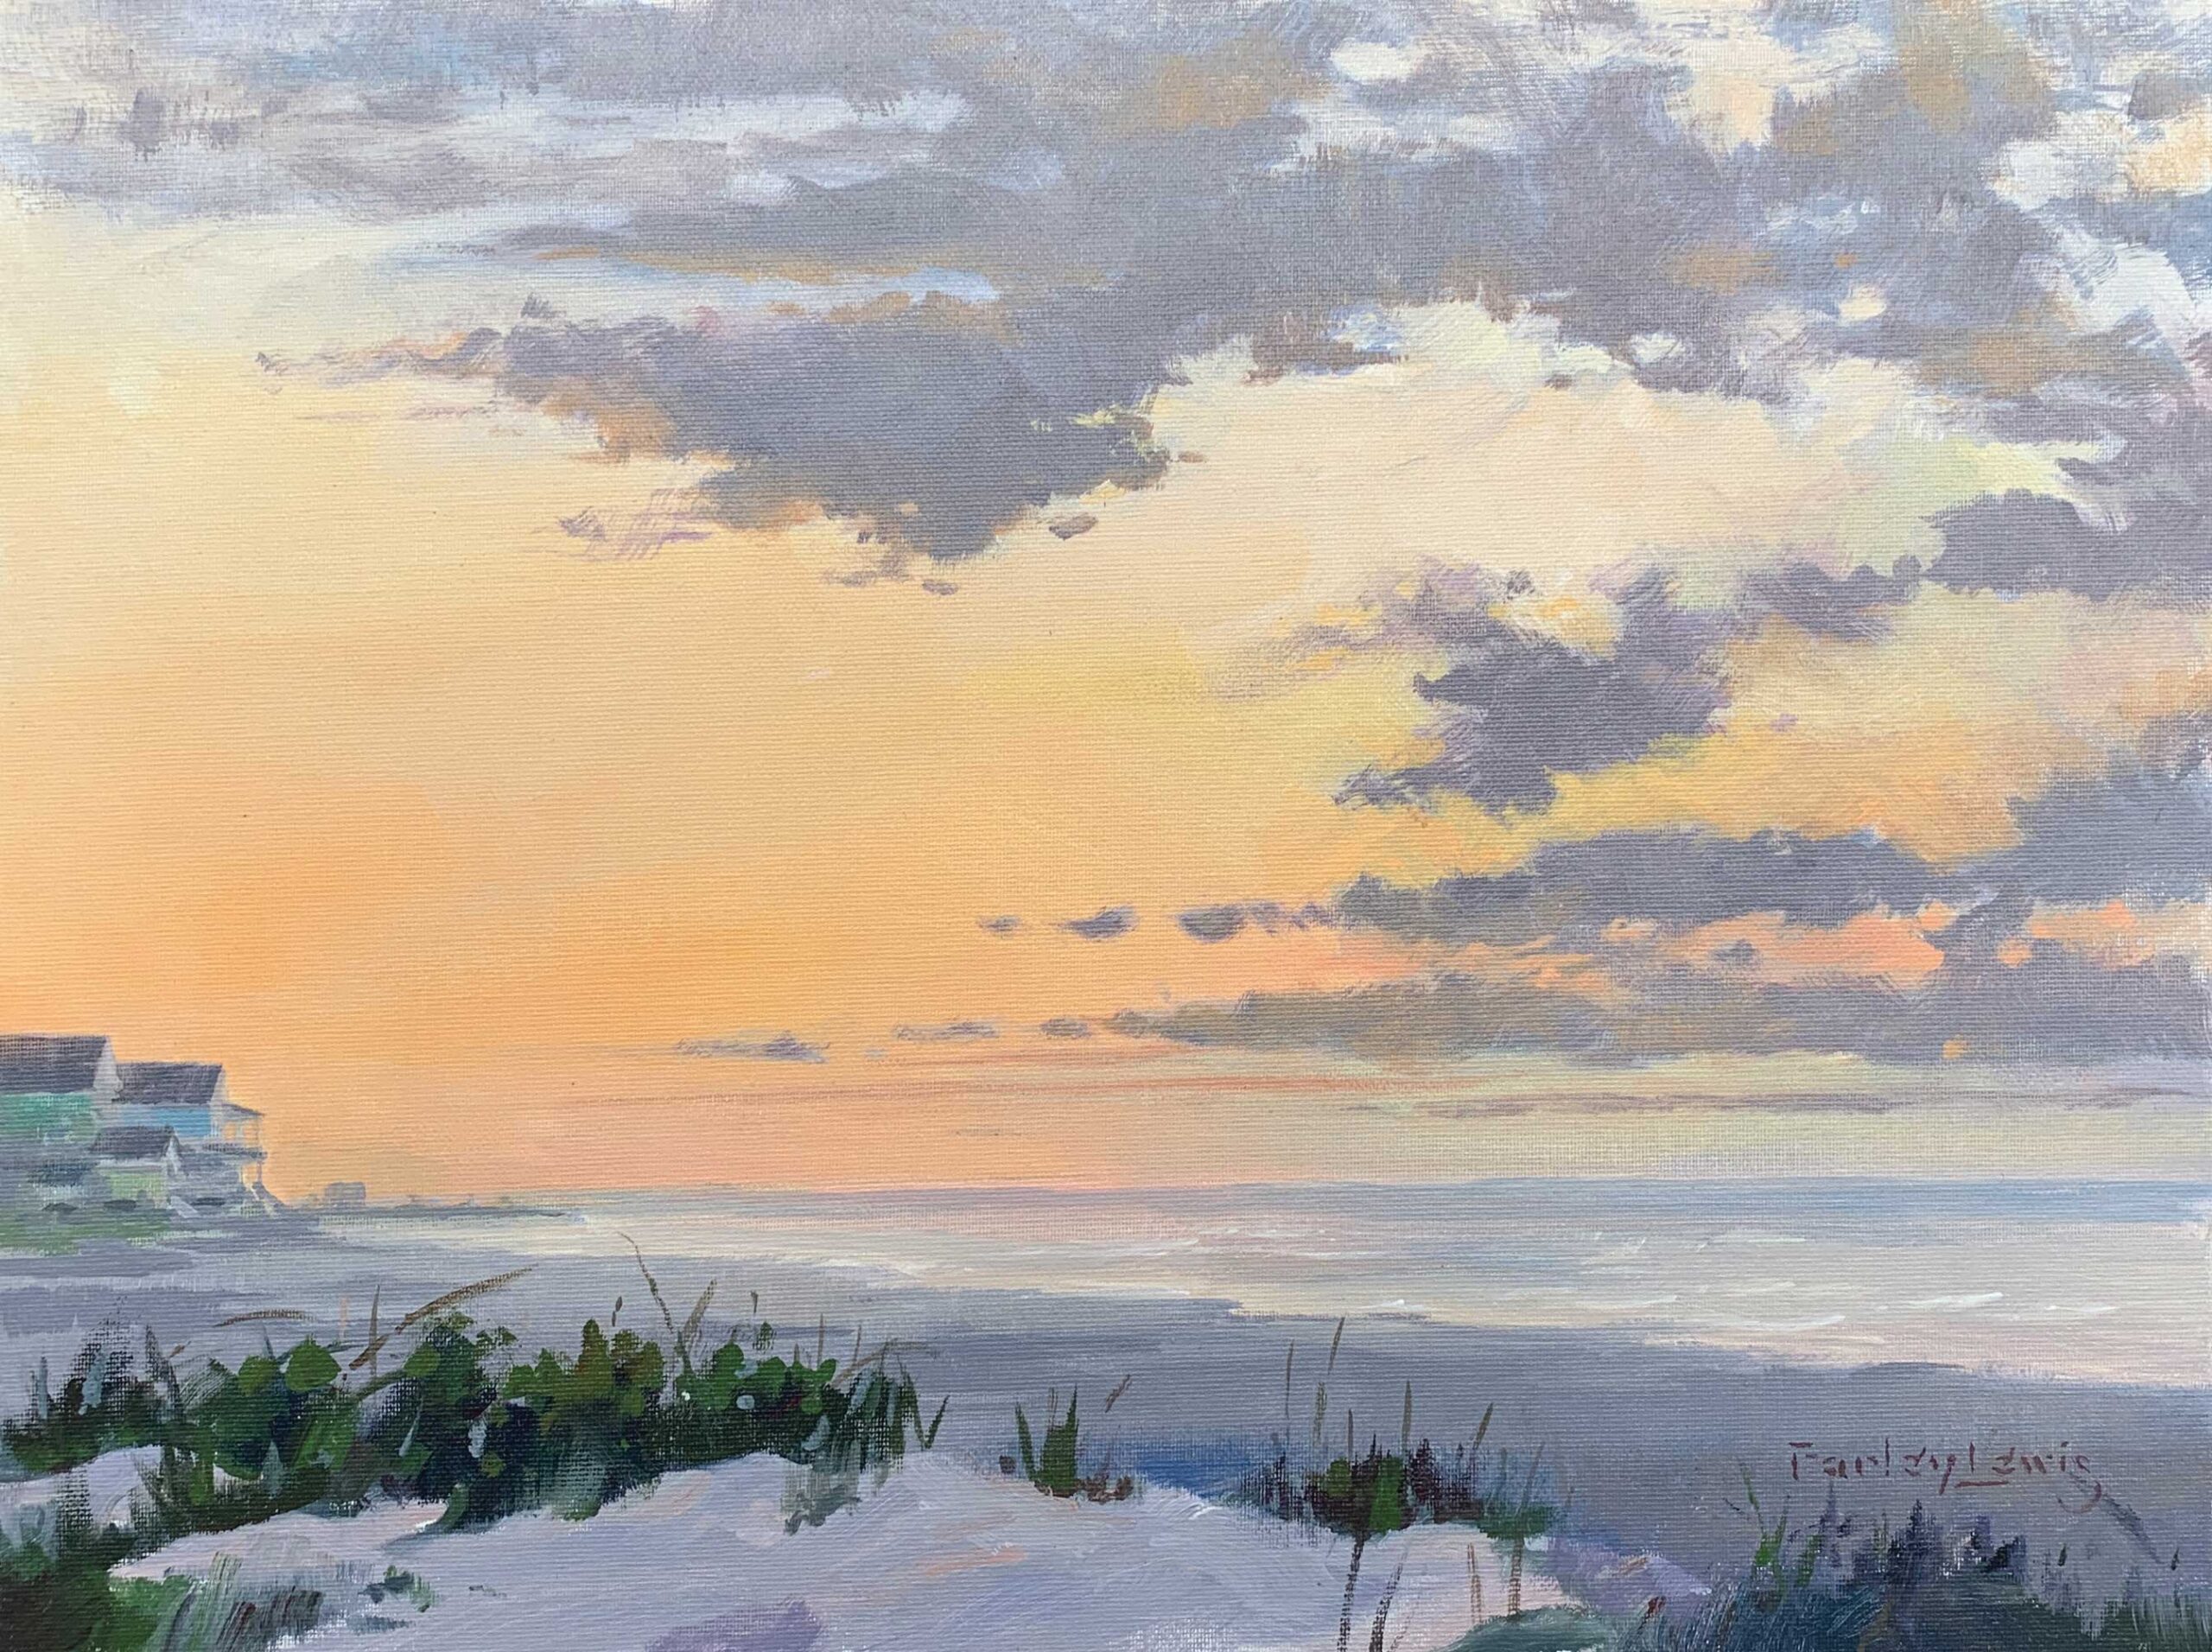 Farley Lewis, “Before the Rush,” 2021, acrylic, 12 x 16 in., Available from Gallery Augusta, Augusta, MO, Plein air 